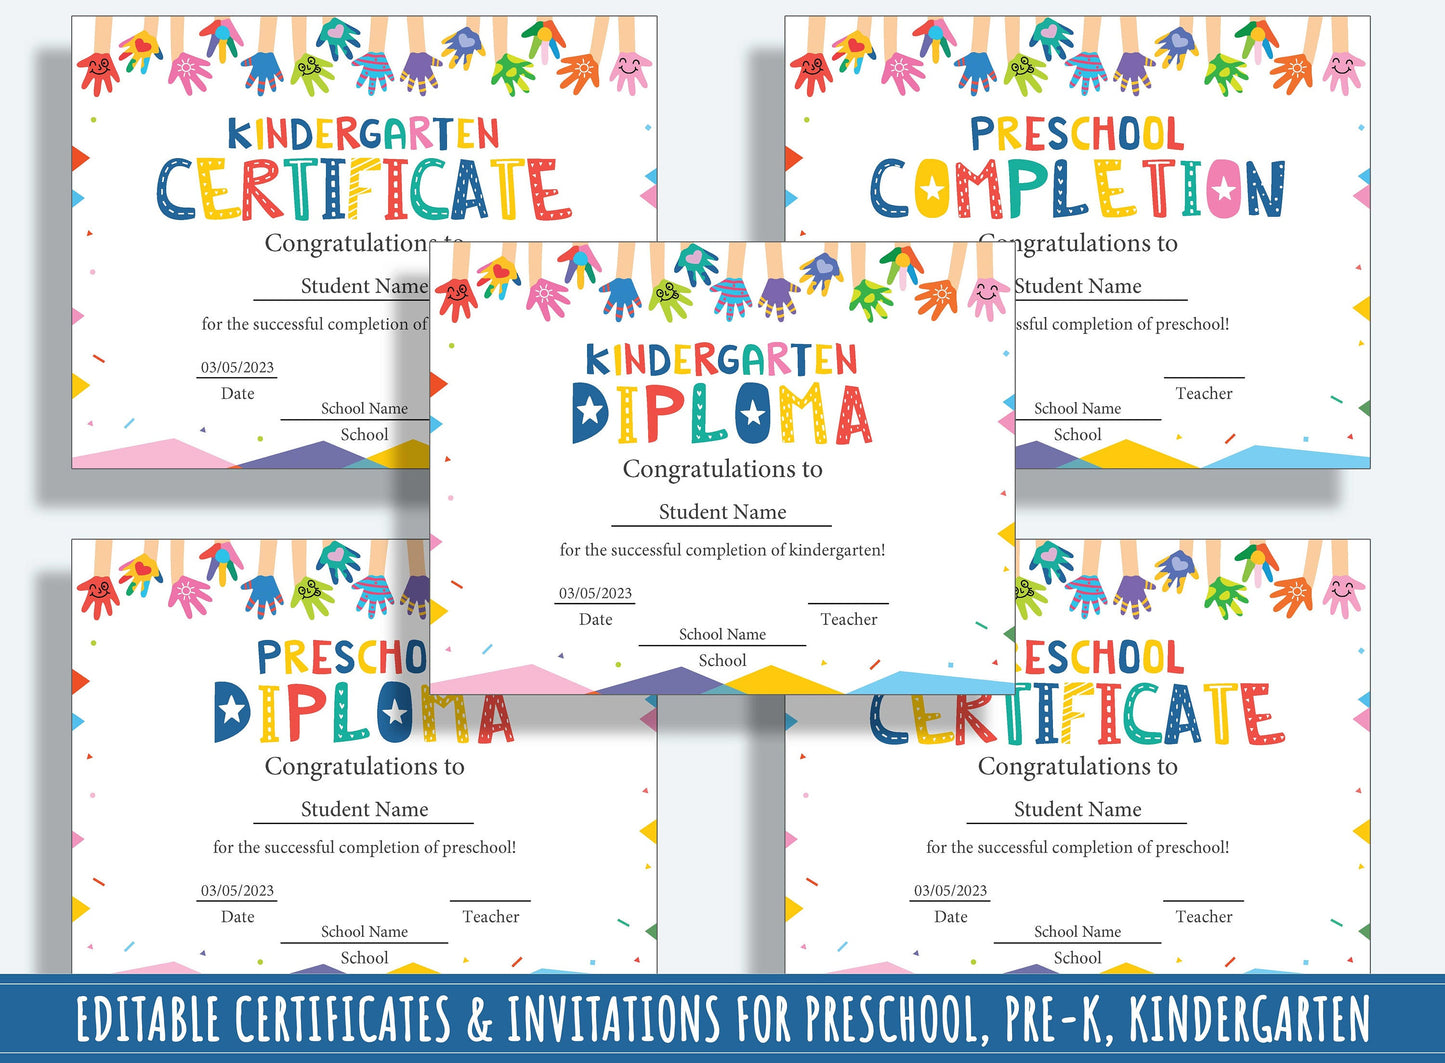 Colorful Creations: 37 Editable Pages of Painted Children Hands-themed Diplomas, Certificates, and Invitations for Preschool & Kindergarten